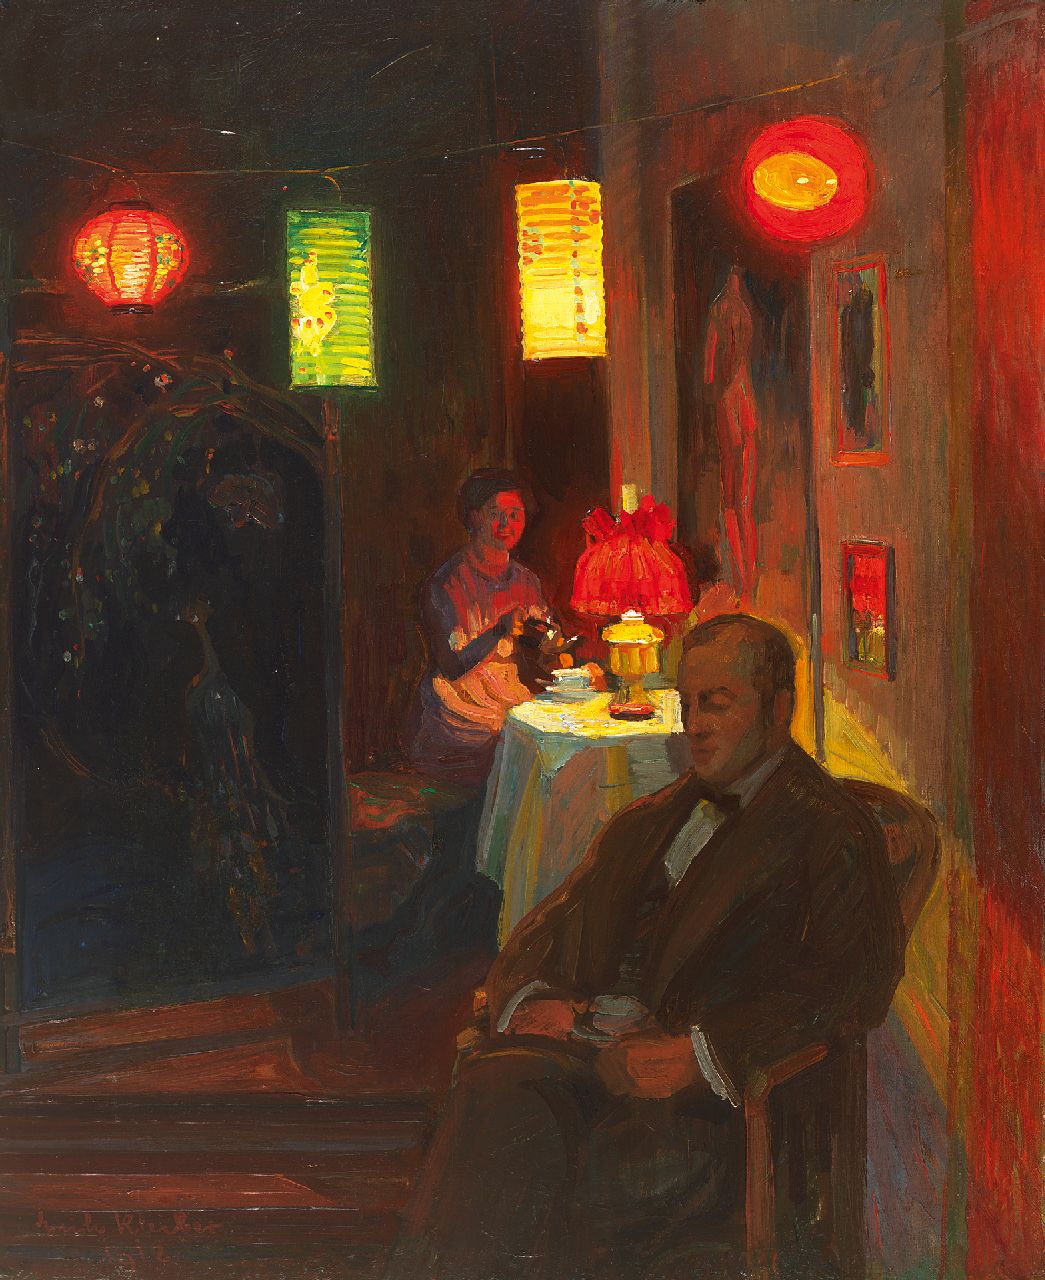 Kleiber E.  | Erich Kleiber | Paintings offered for sale | Evening tea time with Chinese lanterns, oil on canvas 68.0 x 55.0 cm, signed l.l. and dated 1912